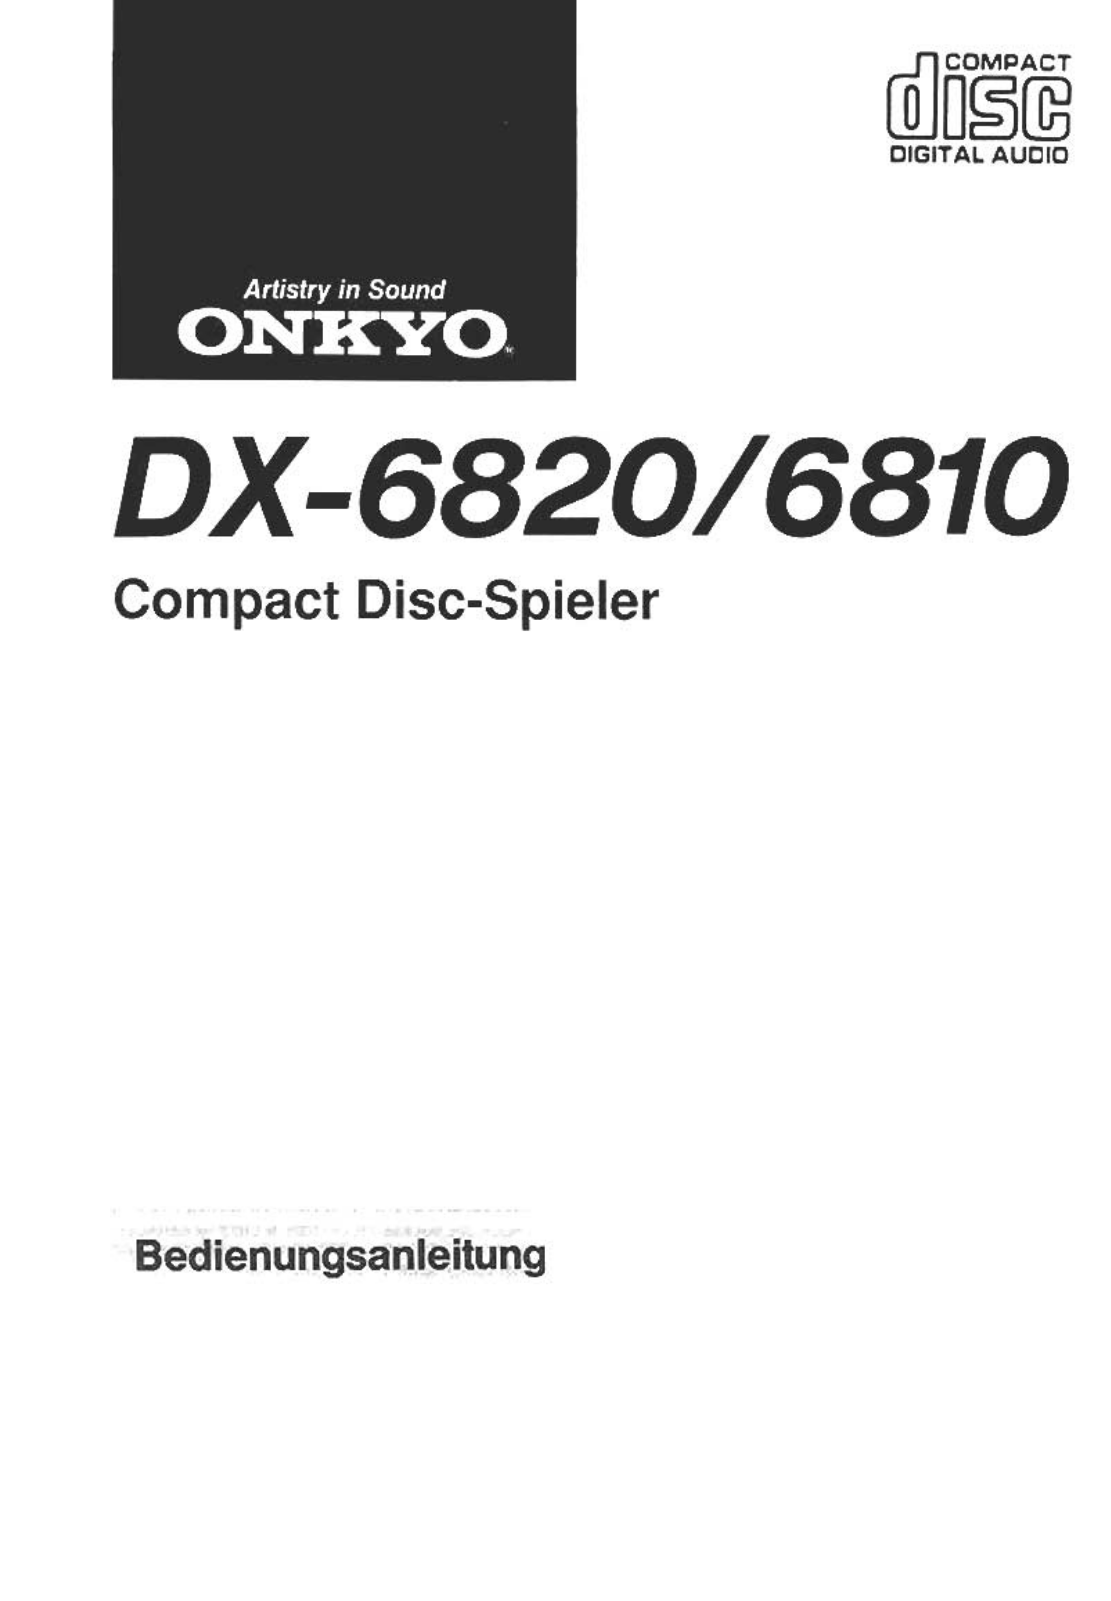 Onkyo DX-6820, DX-6810 Owners Manual